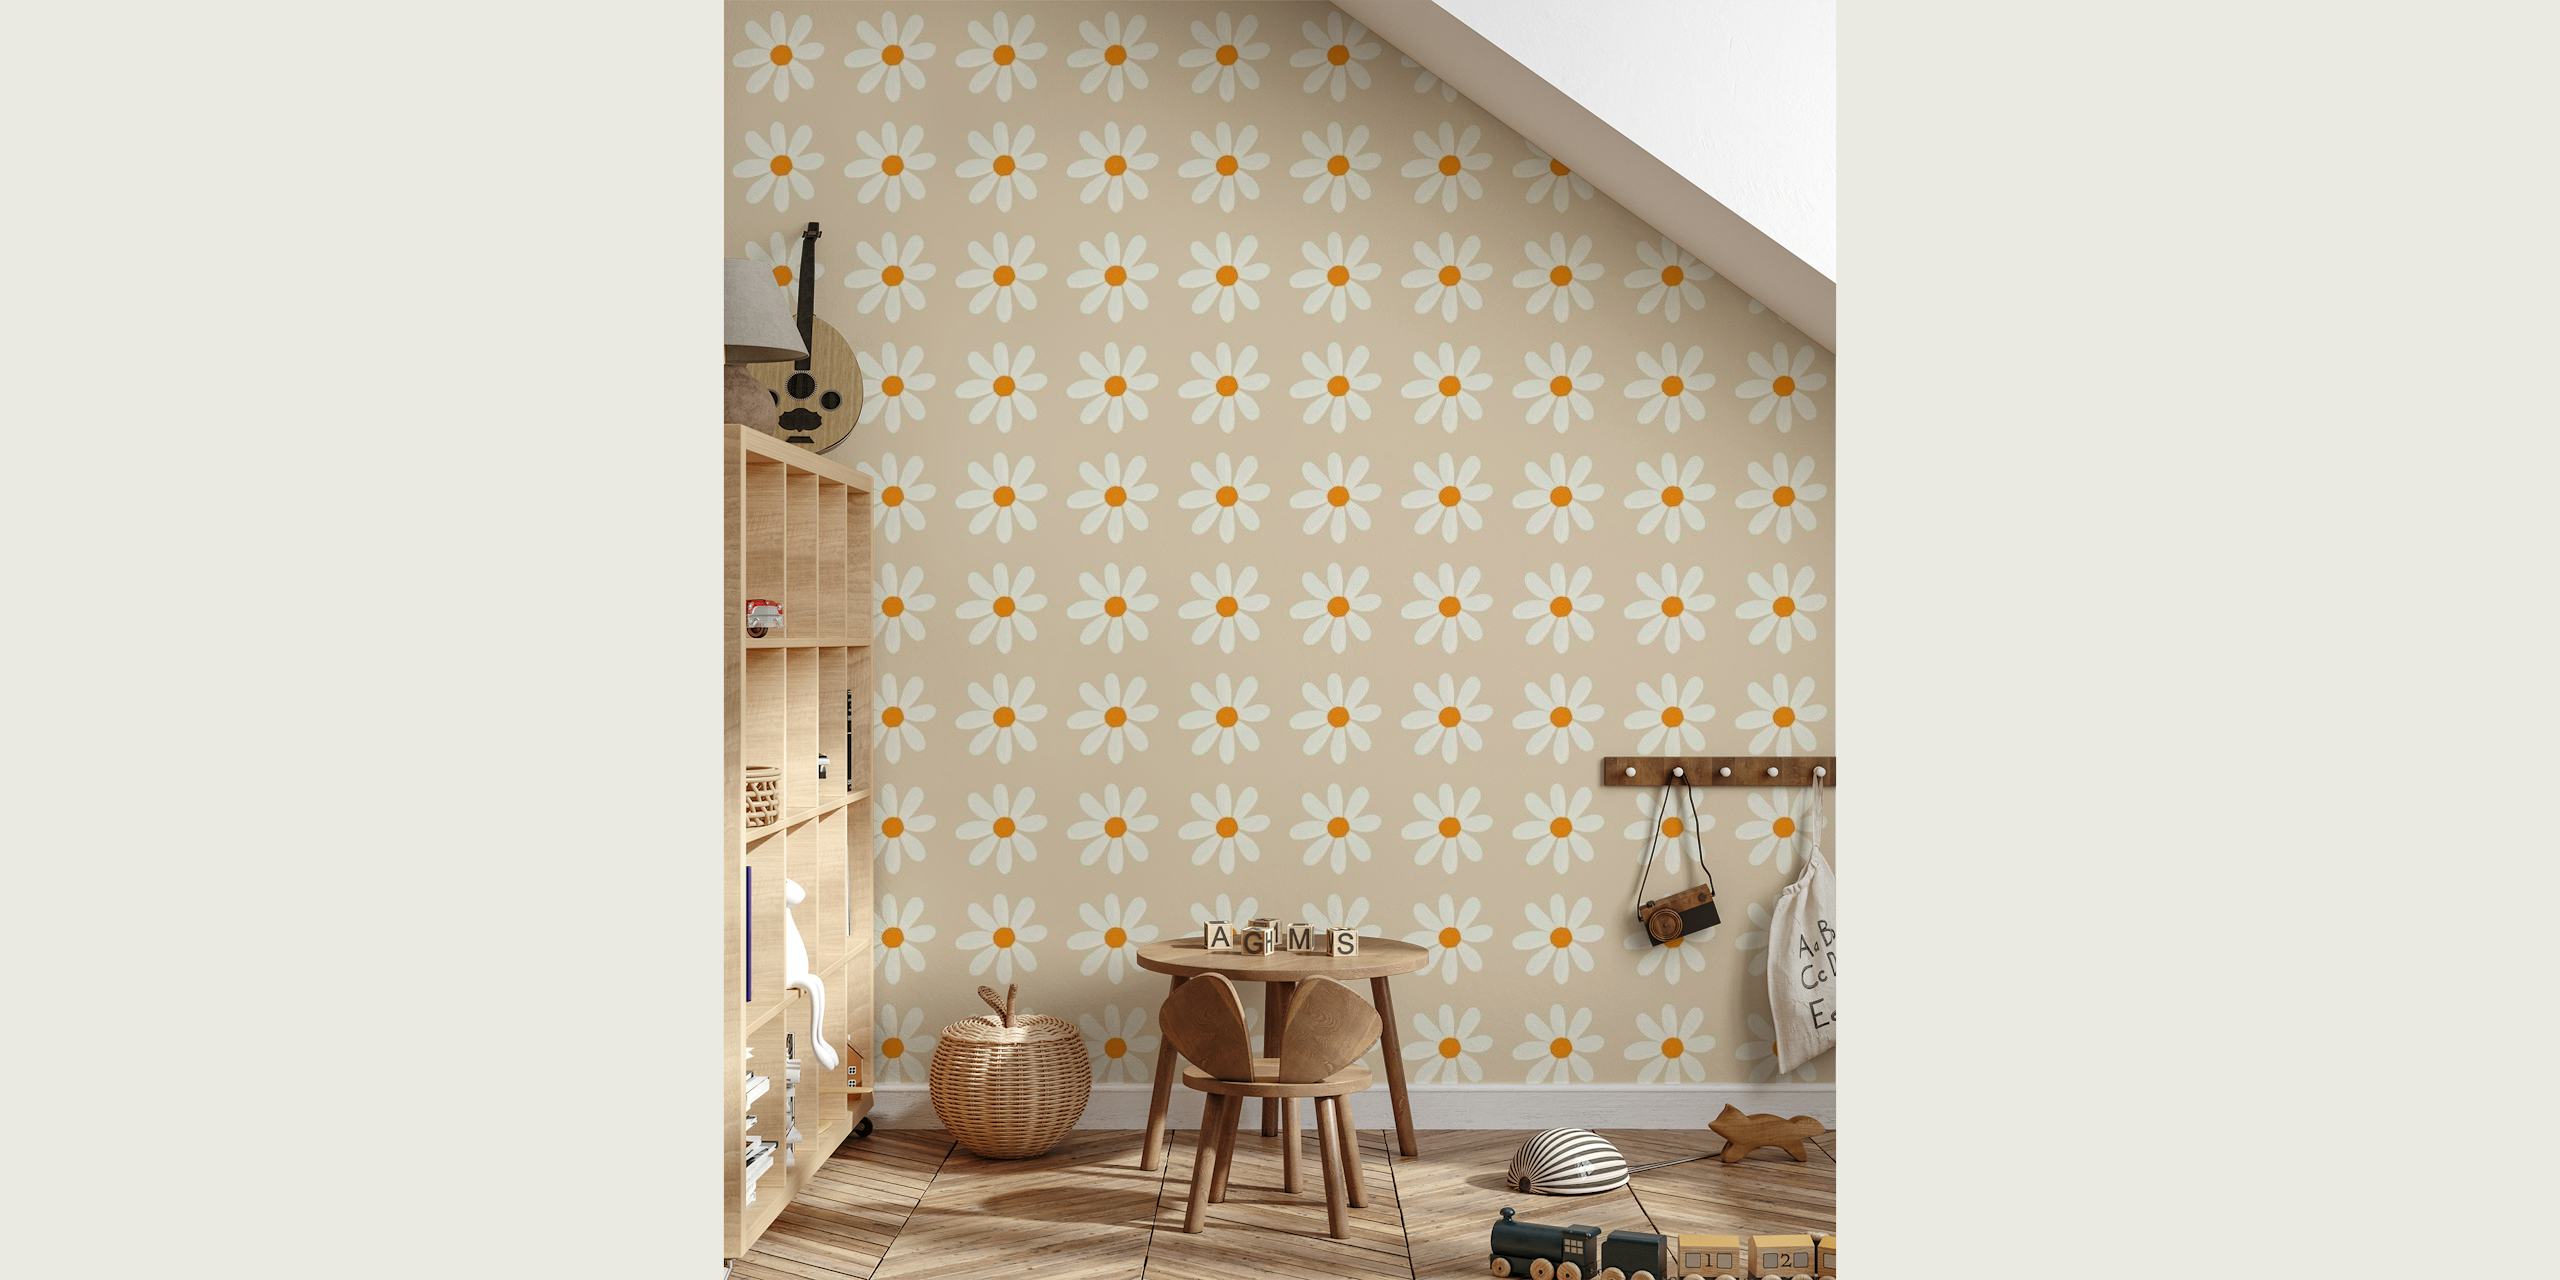 Boho Daisy Pattern wall mural with a repeating daisy design on a neutral background